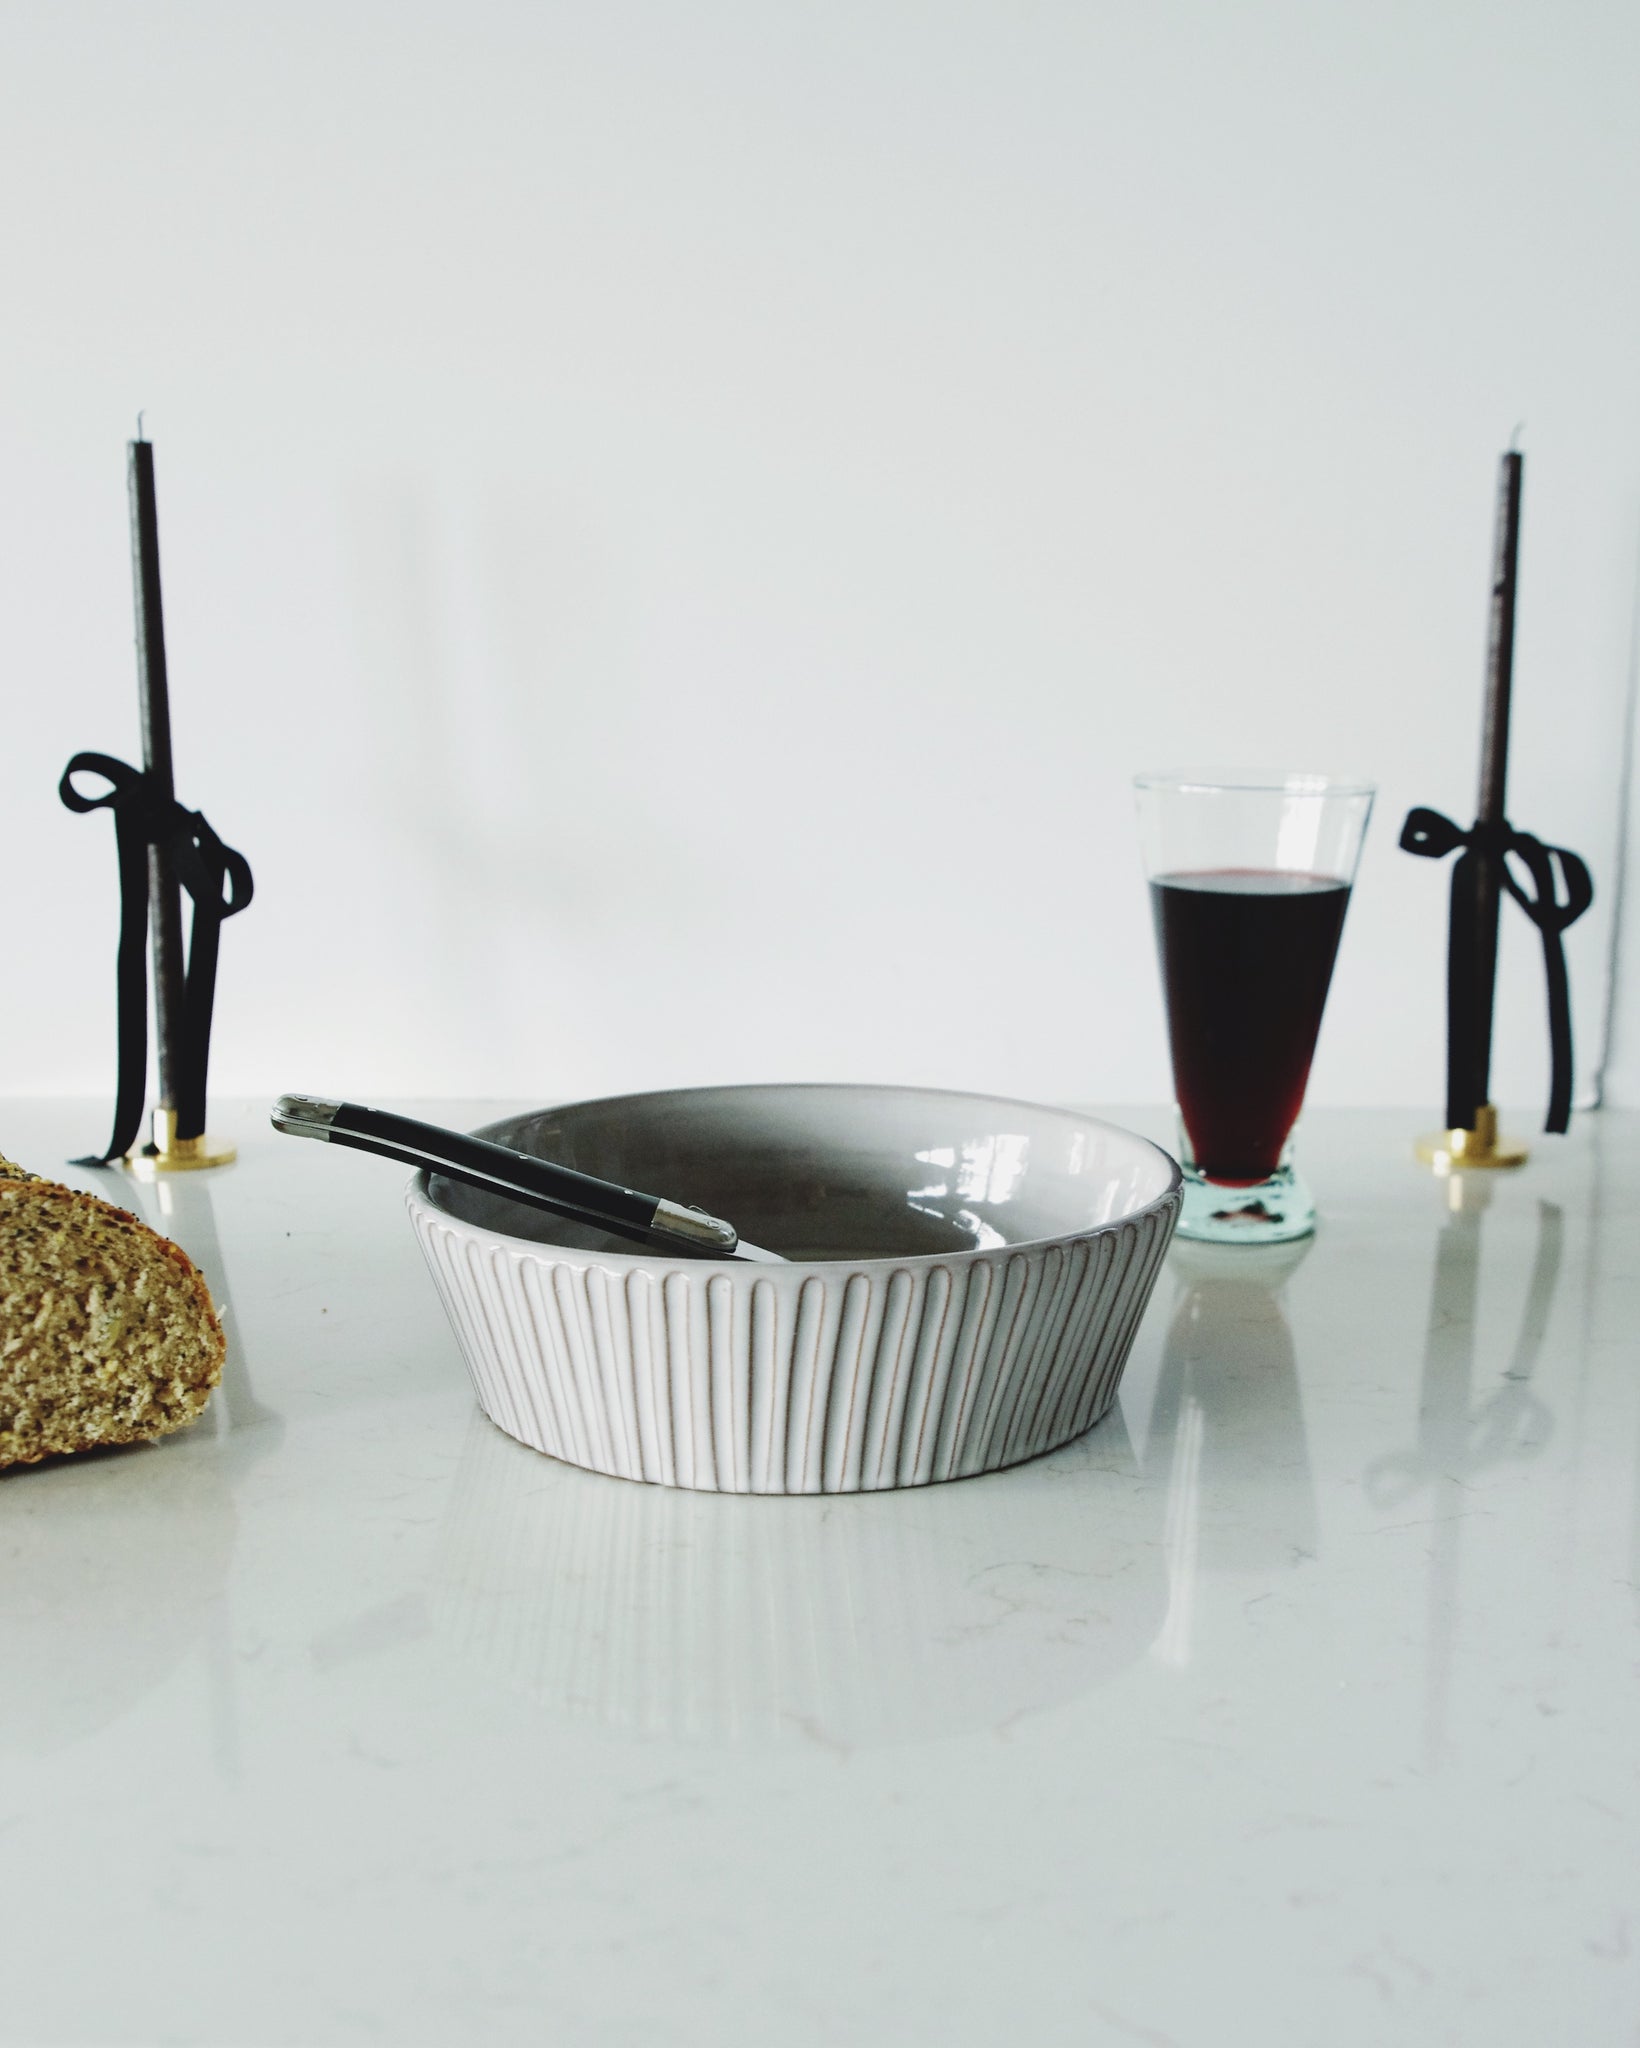 Grey ribbed pasta dish with a black-handled utensil, bread slice, and wine glass flanked by black ribbon-tied candles on marble.